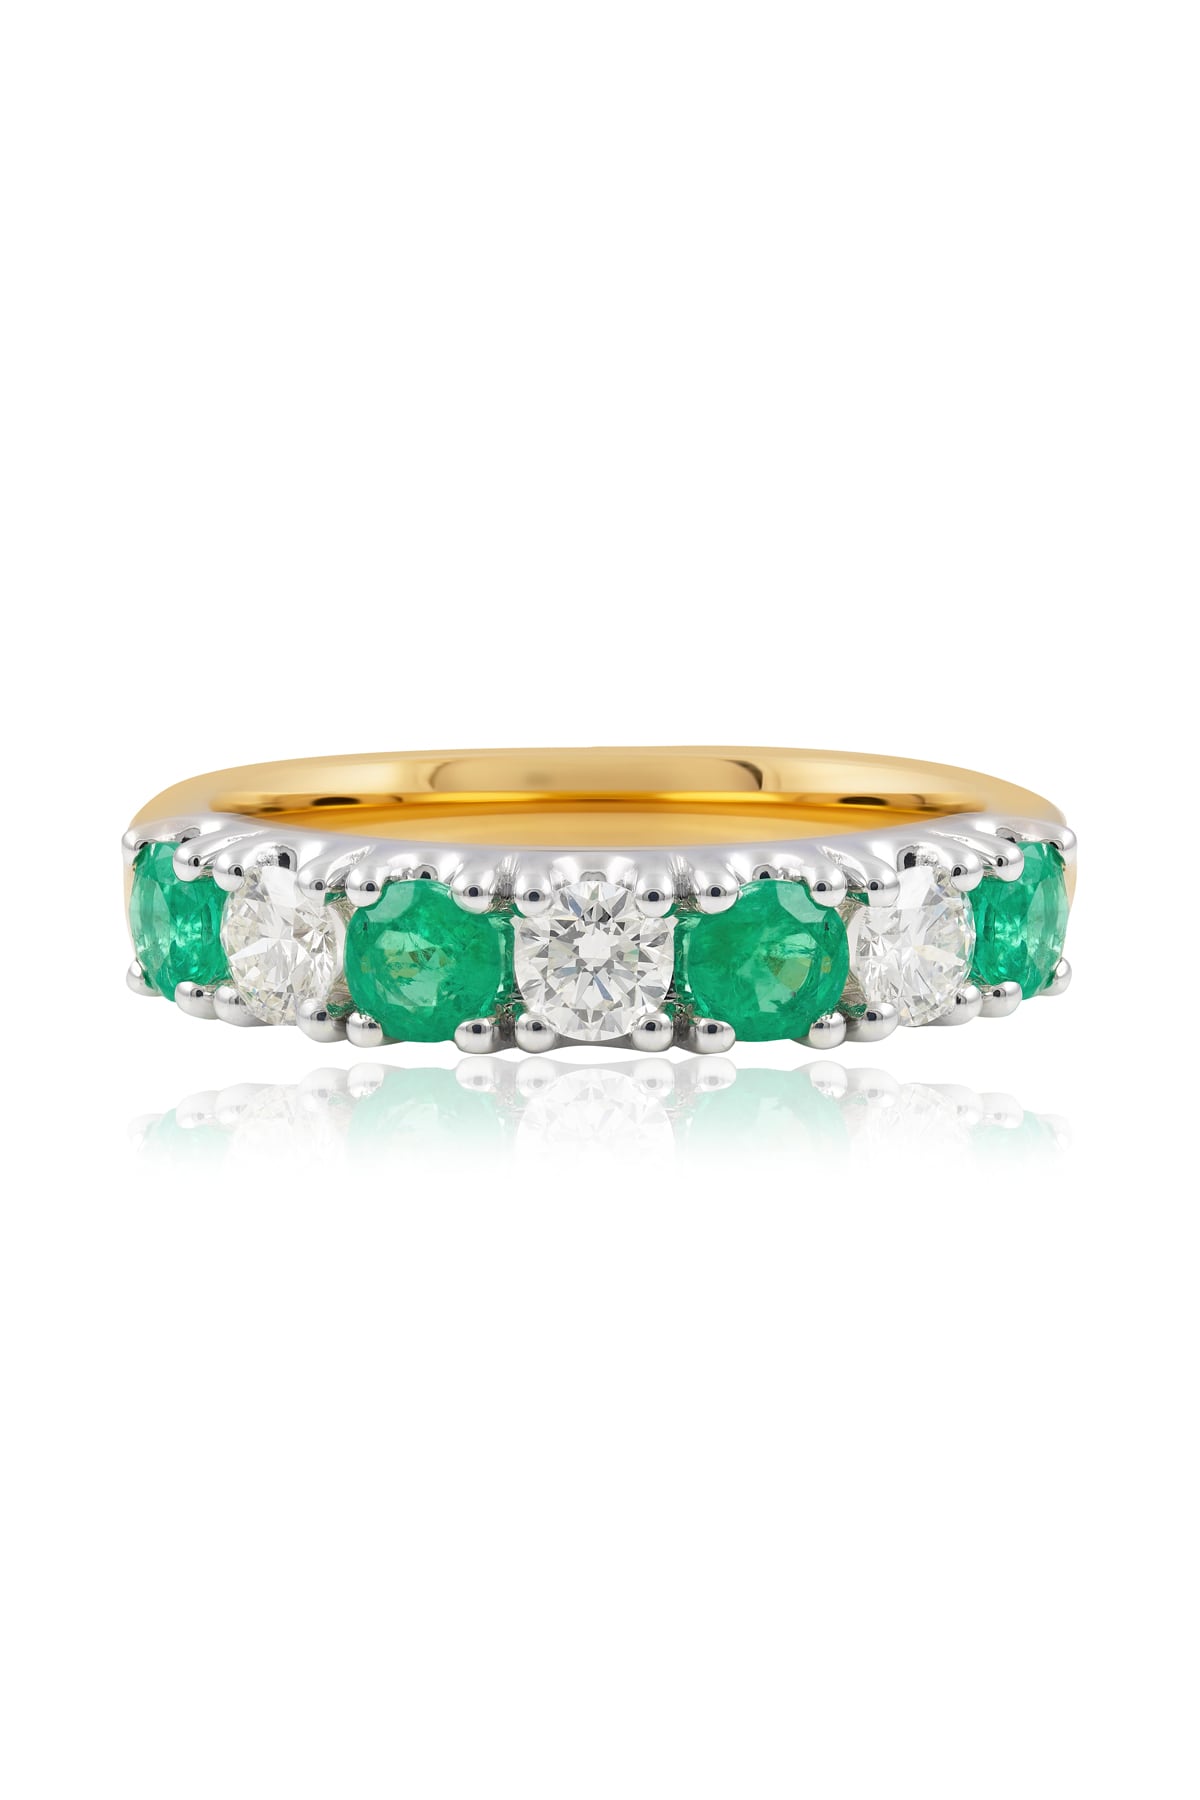 Emerald And Diamond Ring in 18 Carat Yellow And White Gold from LeGassick Jewellery.